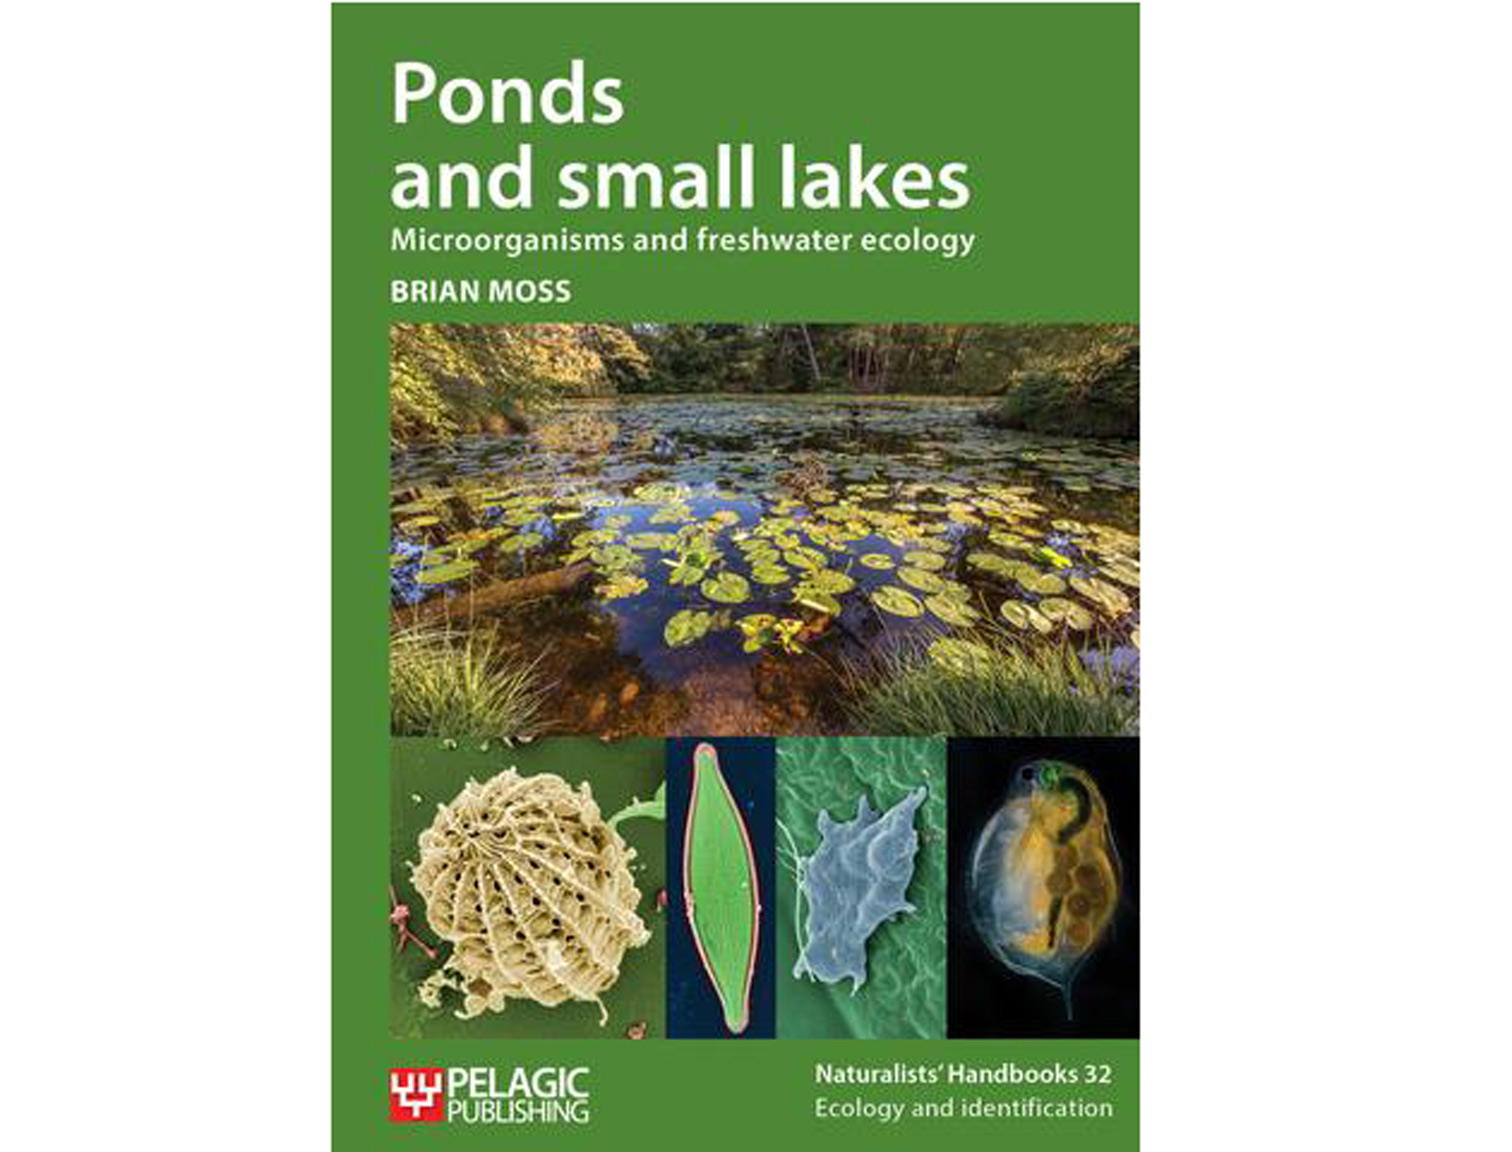 Ponds_and_small_lakes_-_front_cover_large